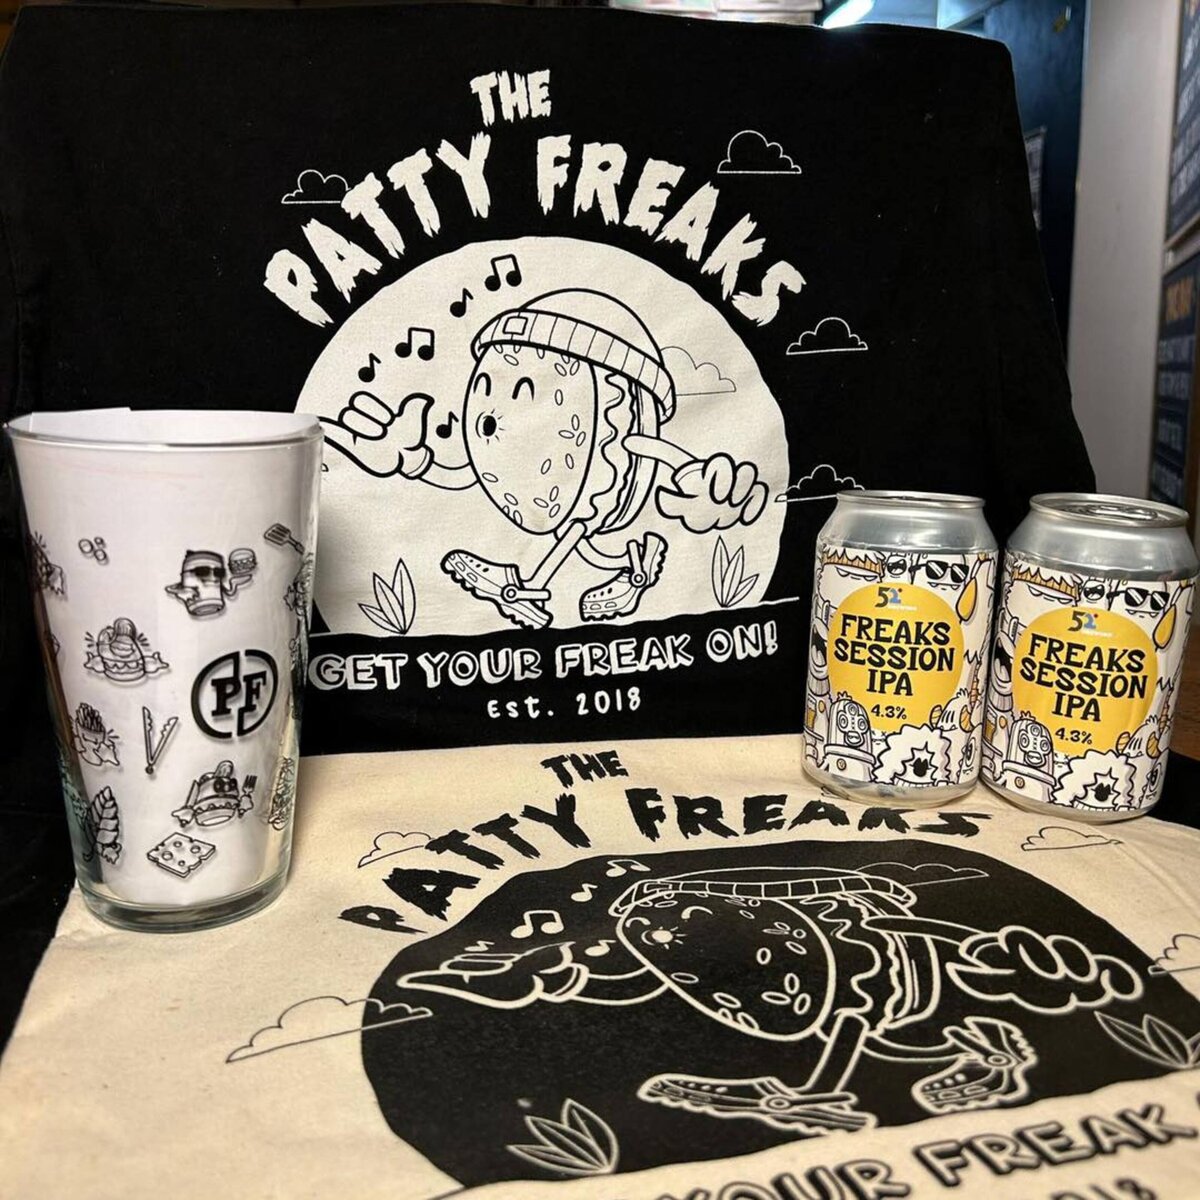 Patty Freaks t-shirts, cup, IPA's and tote bag